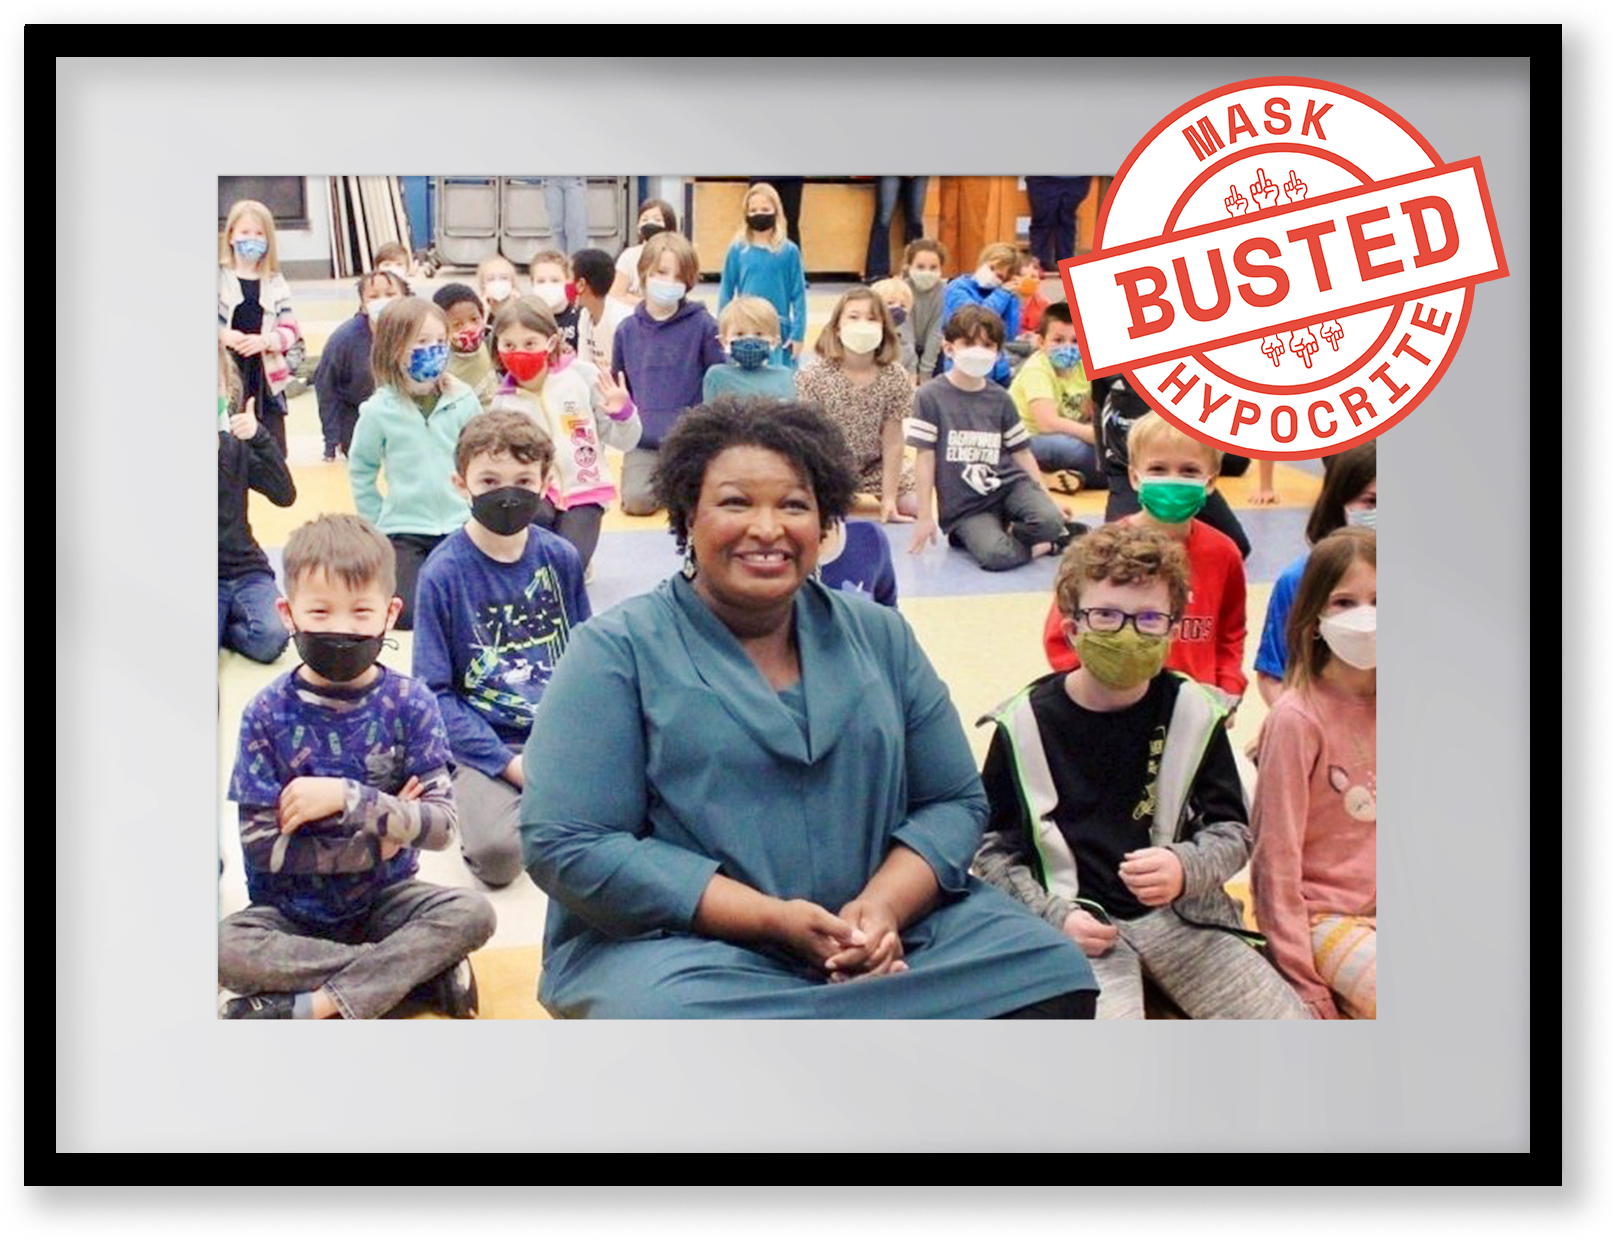 Stacey Abrams appeared maskless in photos alongside elementary school children.
Twitter/@staceyabrams